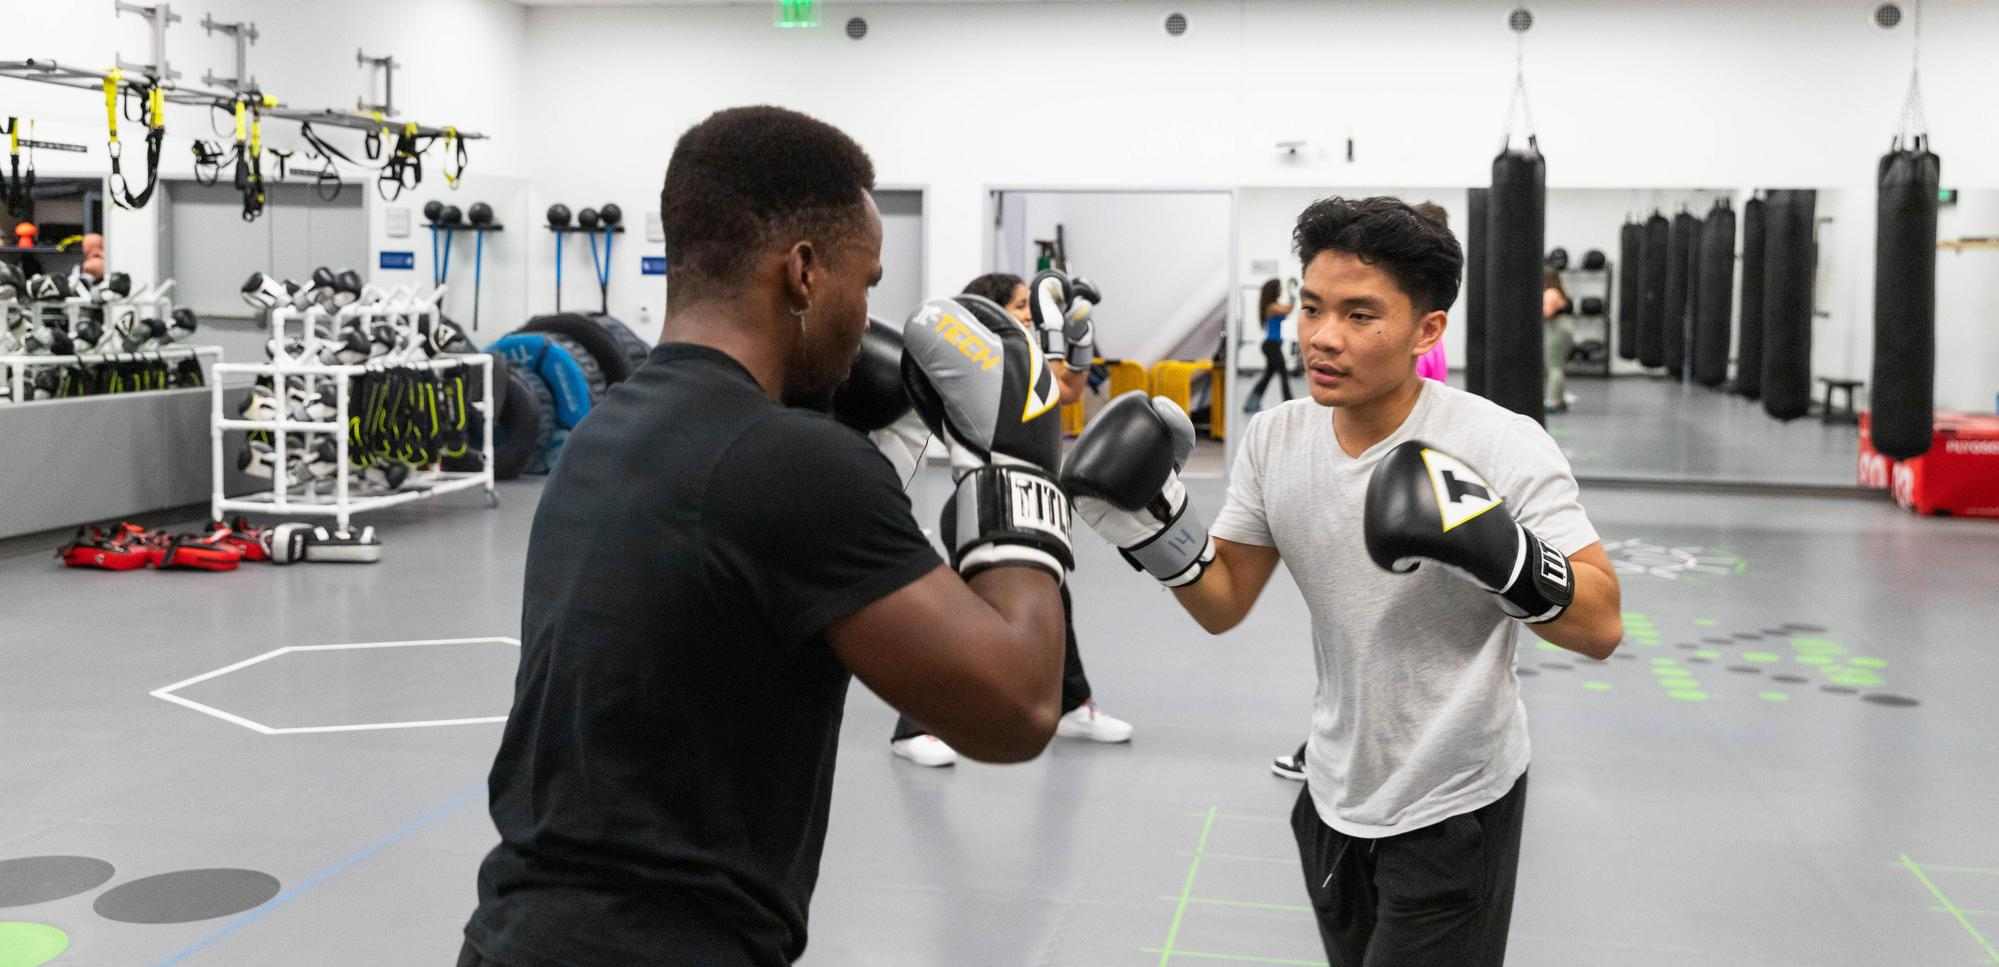 Two students sparing with boxing gloves